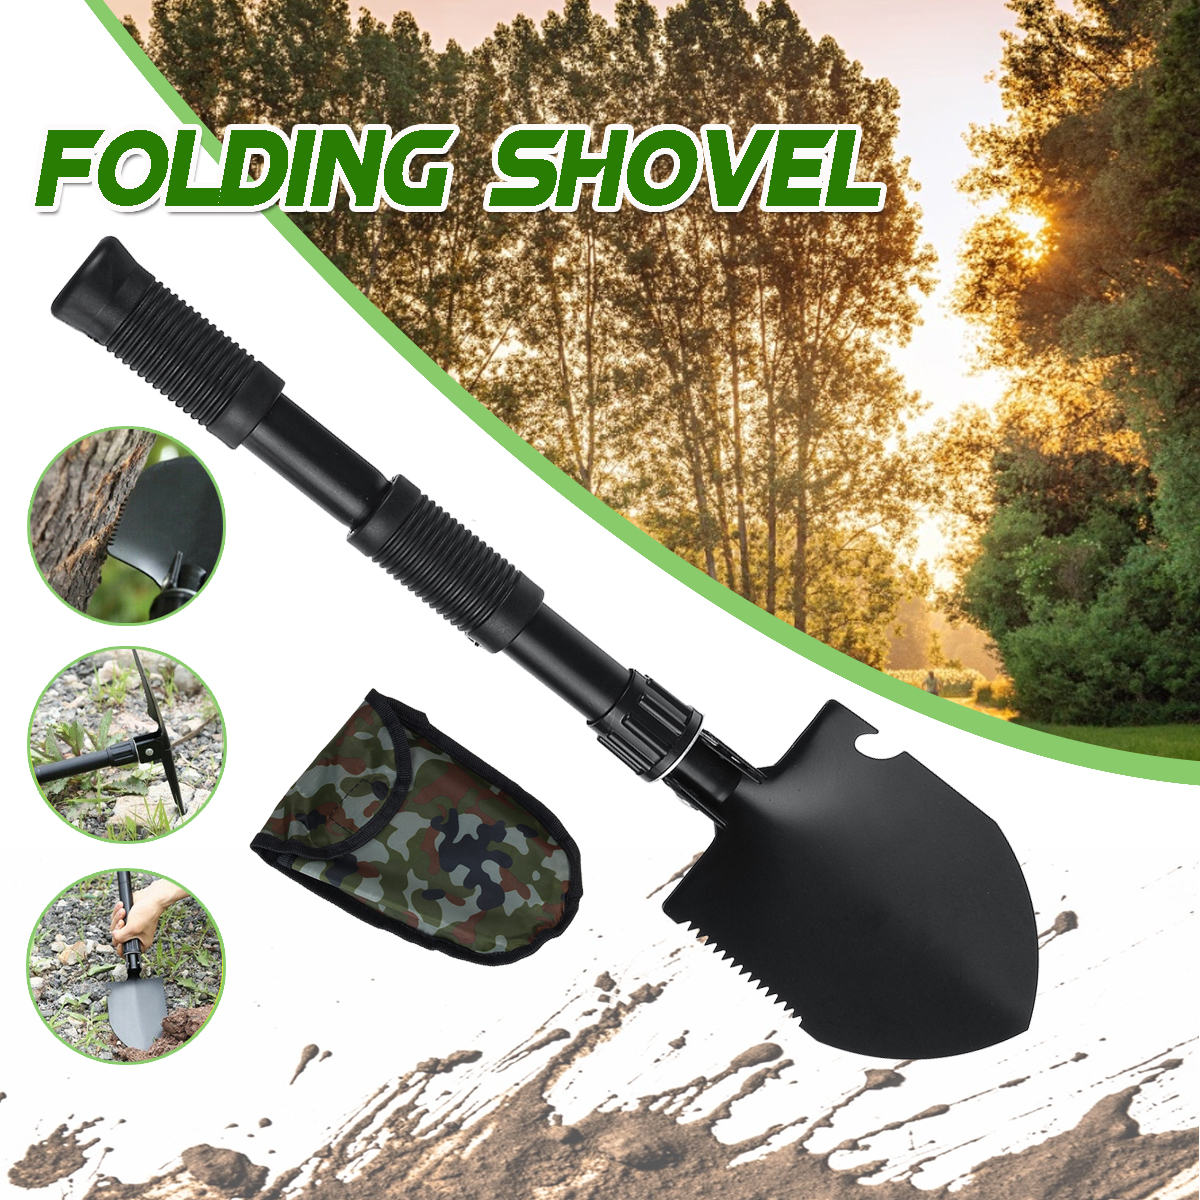 4-in-1-Multifunctional-Camping-Folding-Shovel-Carbon-Steel-Garden-Hiking-Outdoor-Activity-Tool-1810044-1